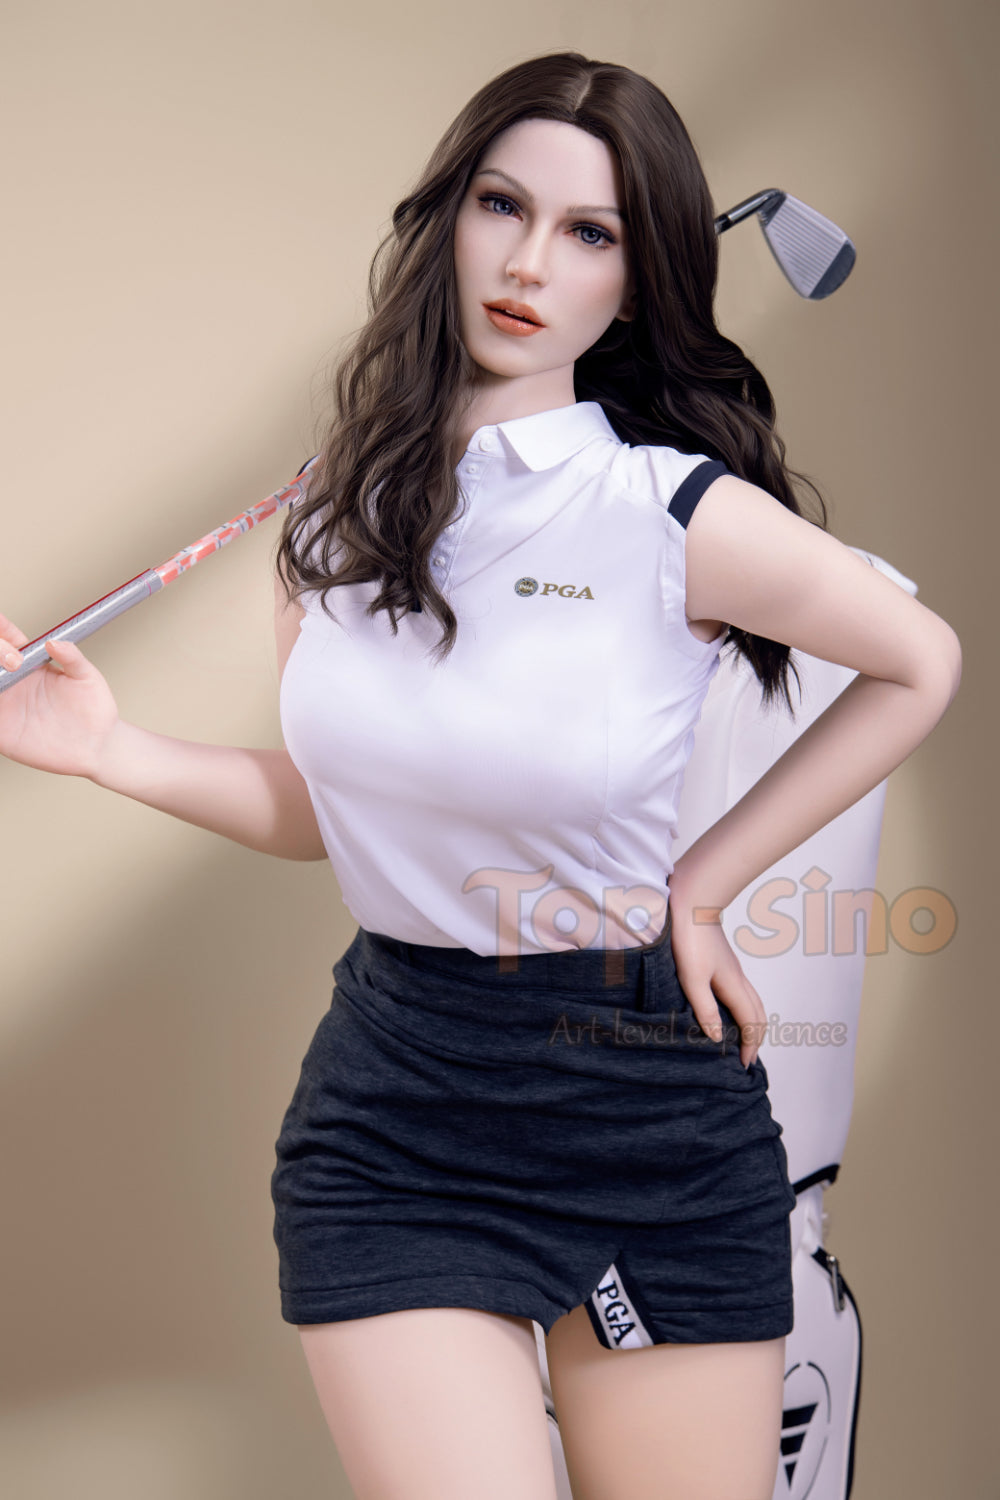 Top Sino 168 cm Platinum Silicone - Thea (RRS+) | Buy Sex Dolls at DOLLS ACTUALLY